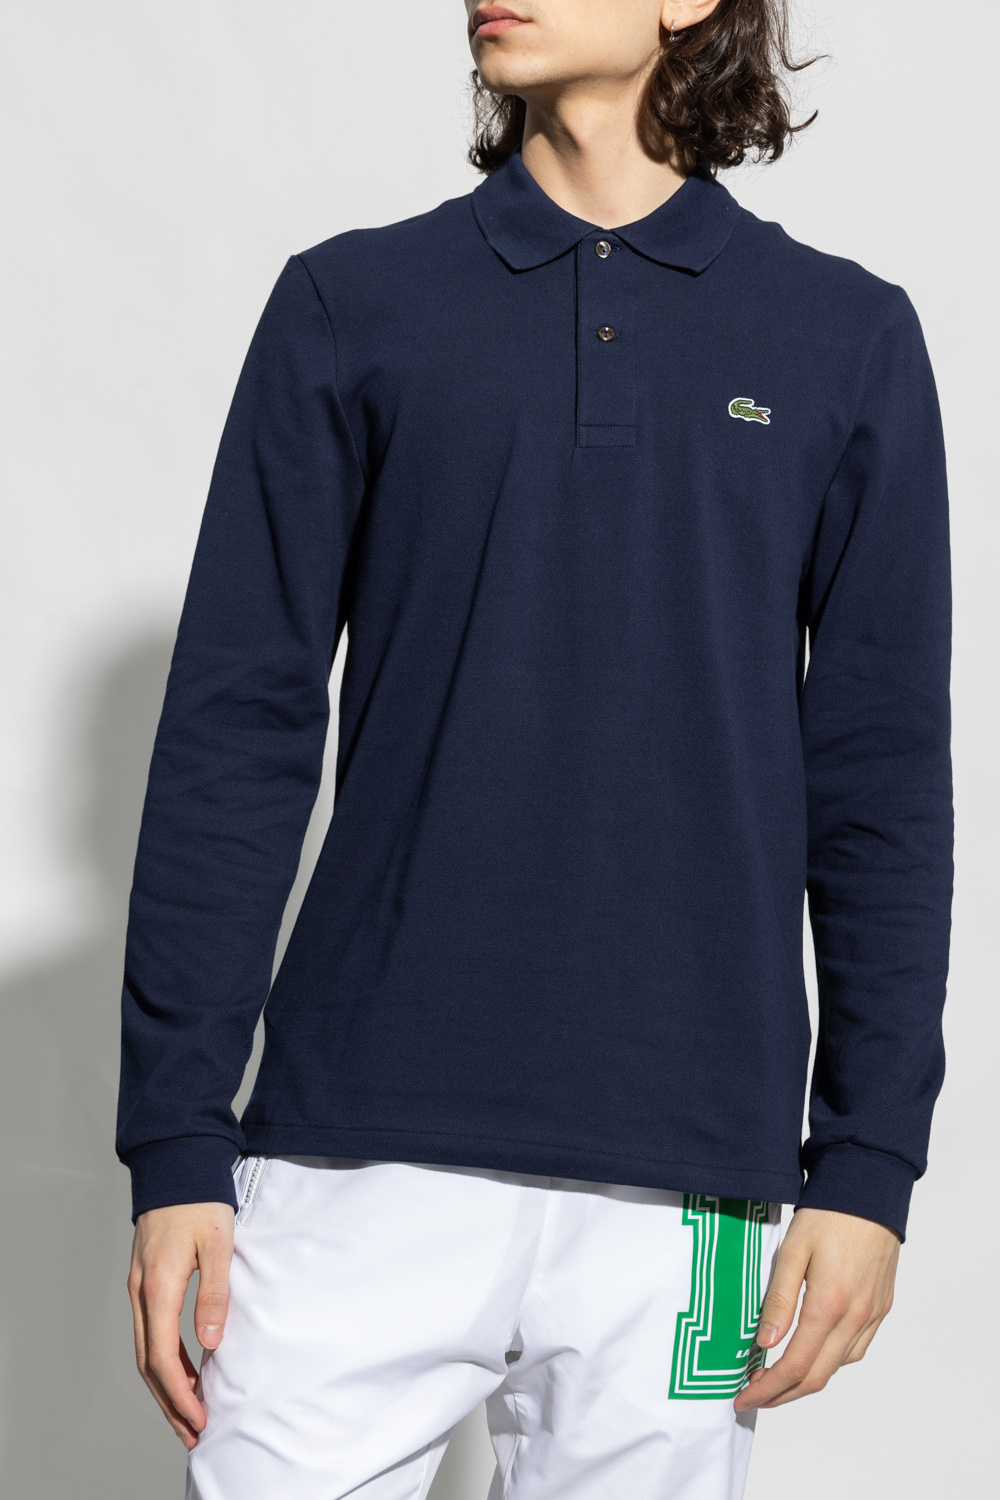 Lacoste Florida Gators Field Day Heathered Polo